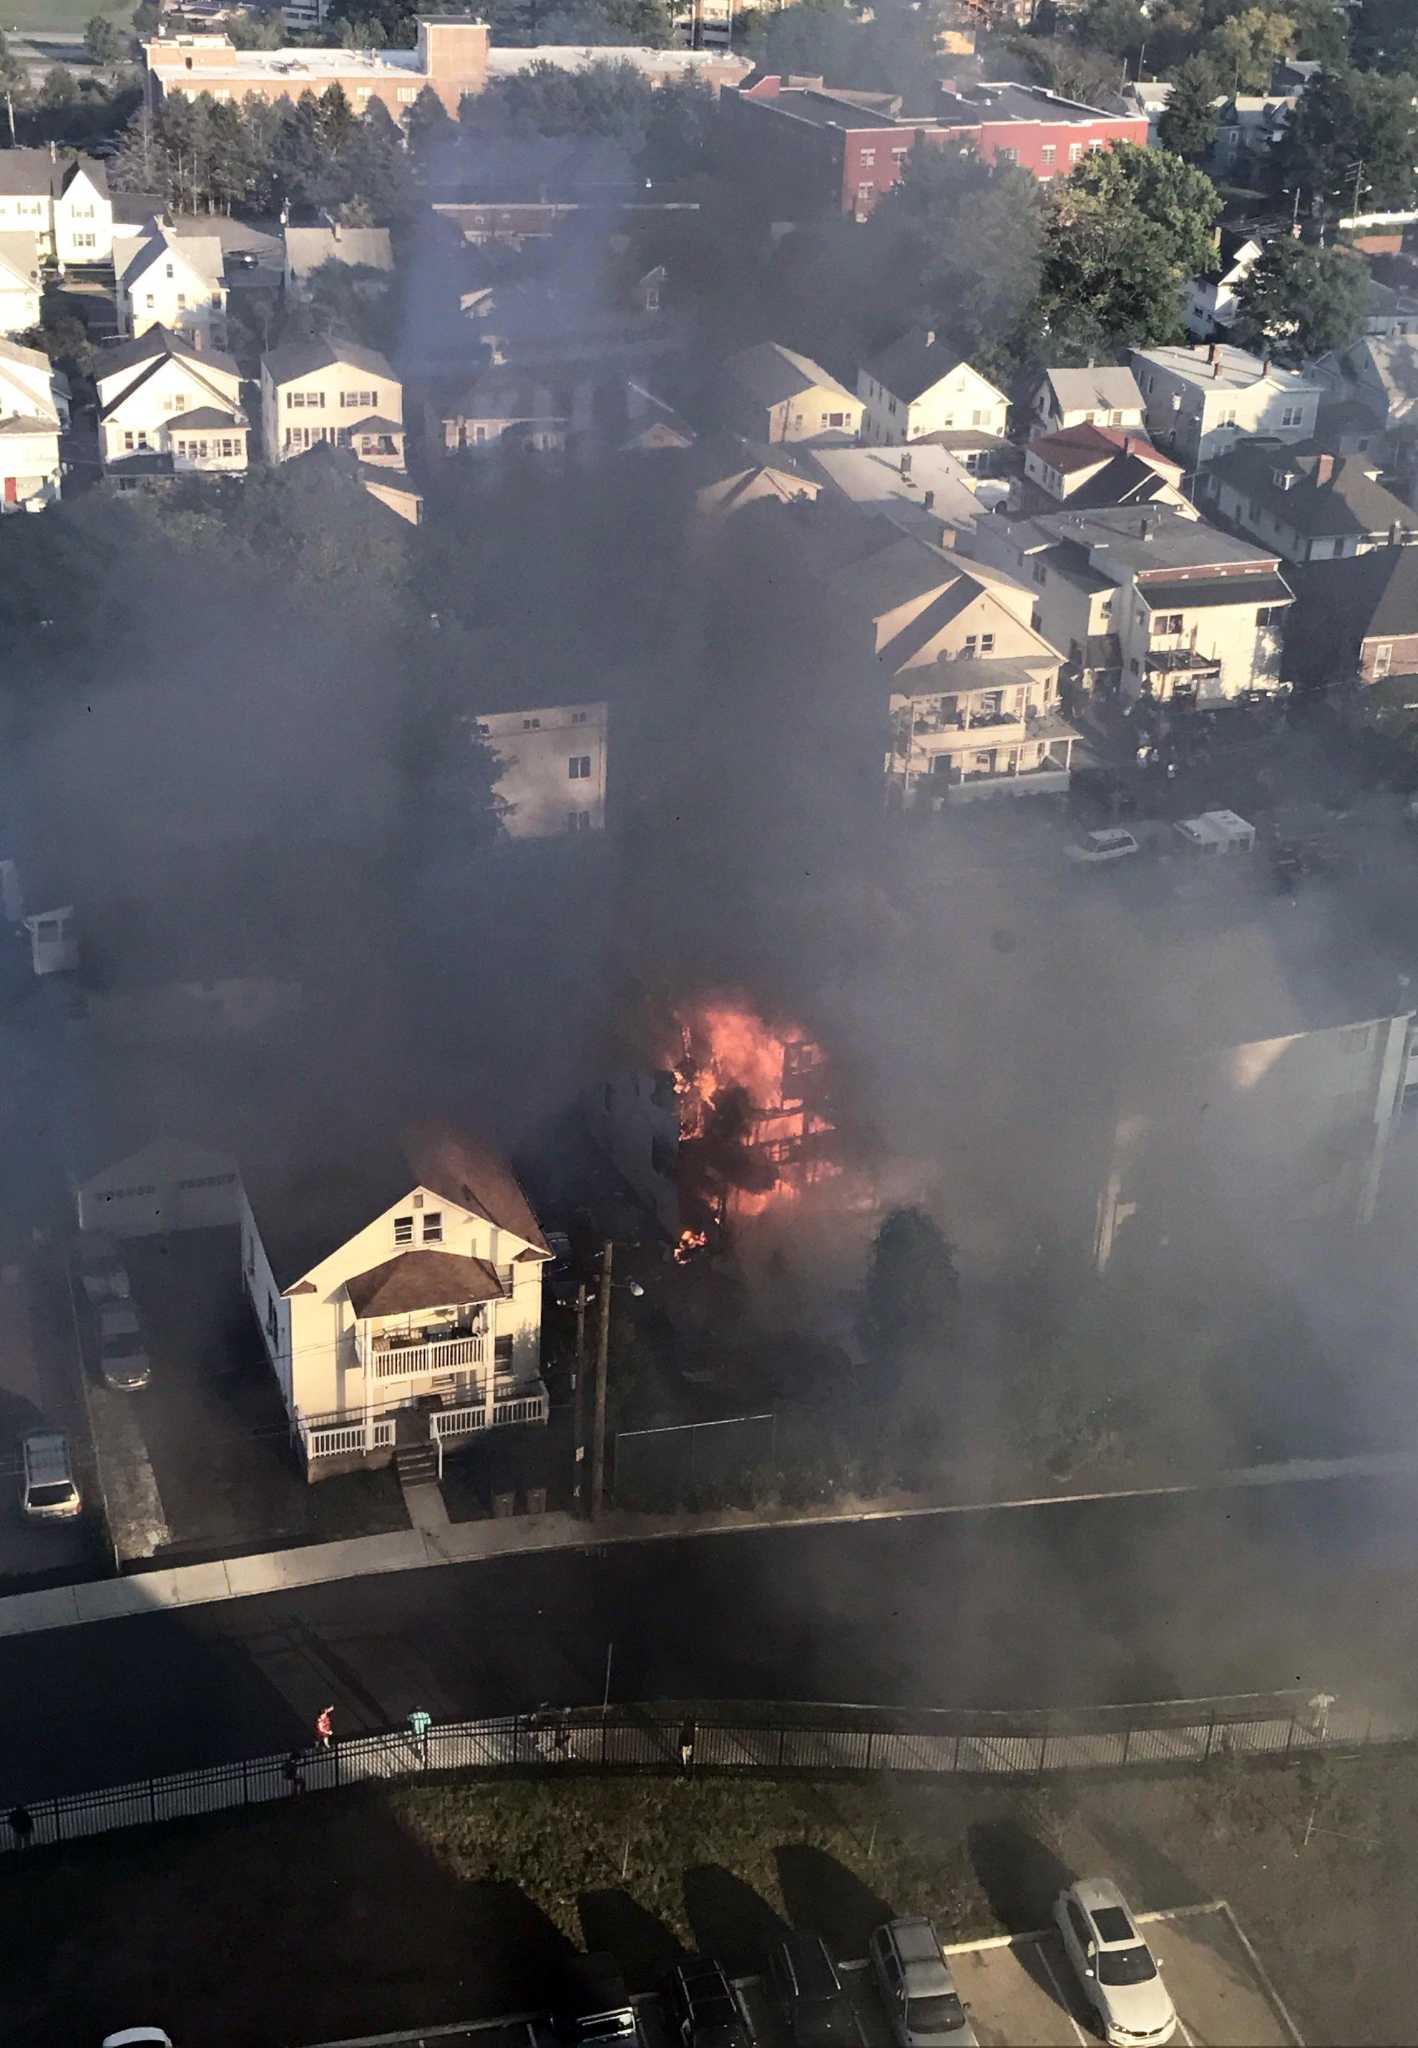 Family aids neighbors trapped on roof during house fire near Stamford Hospital ...